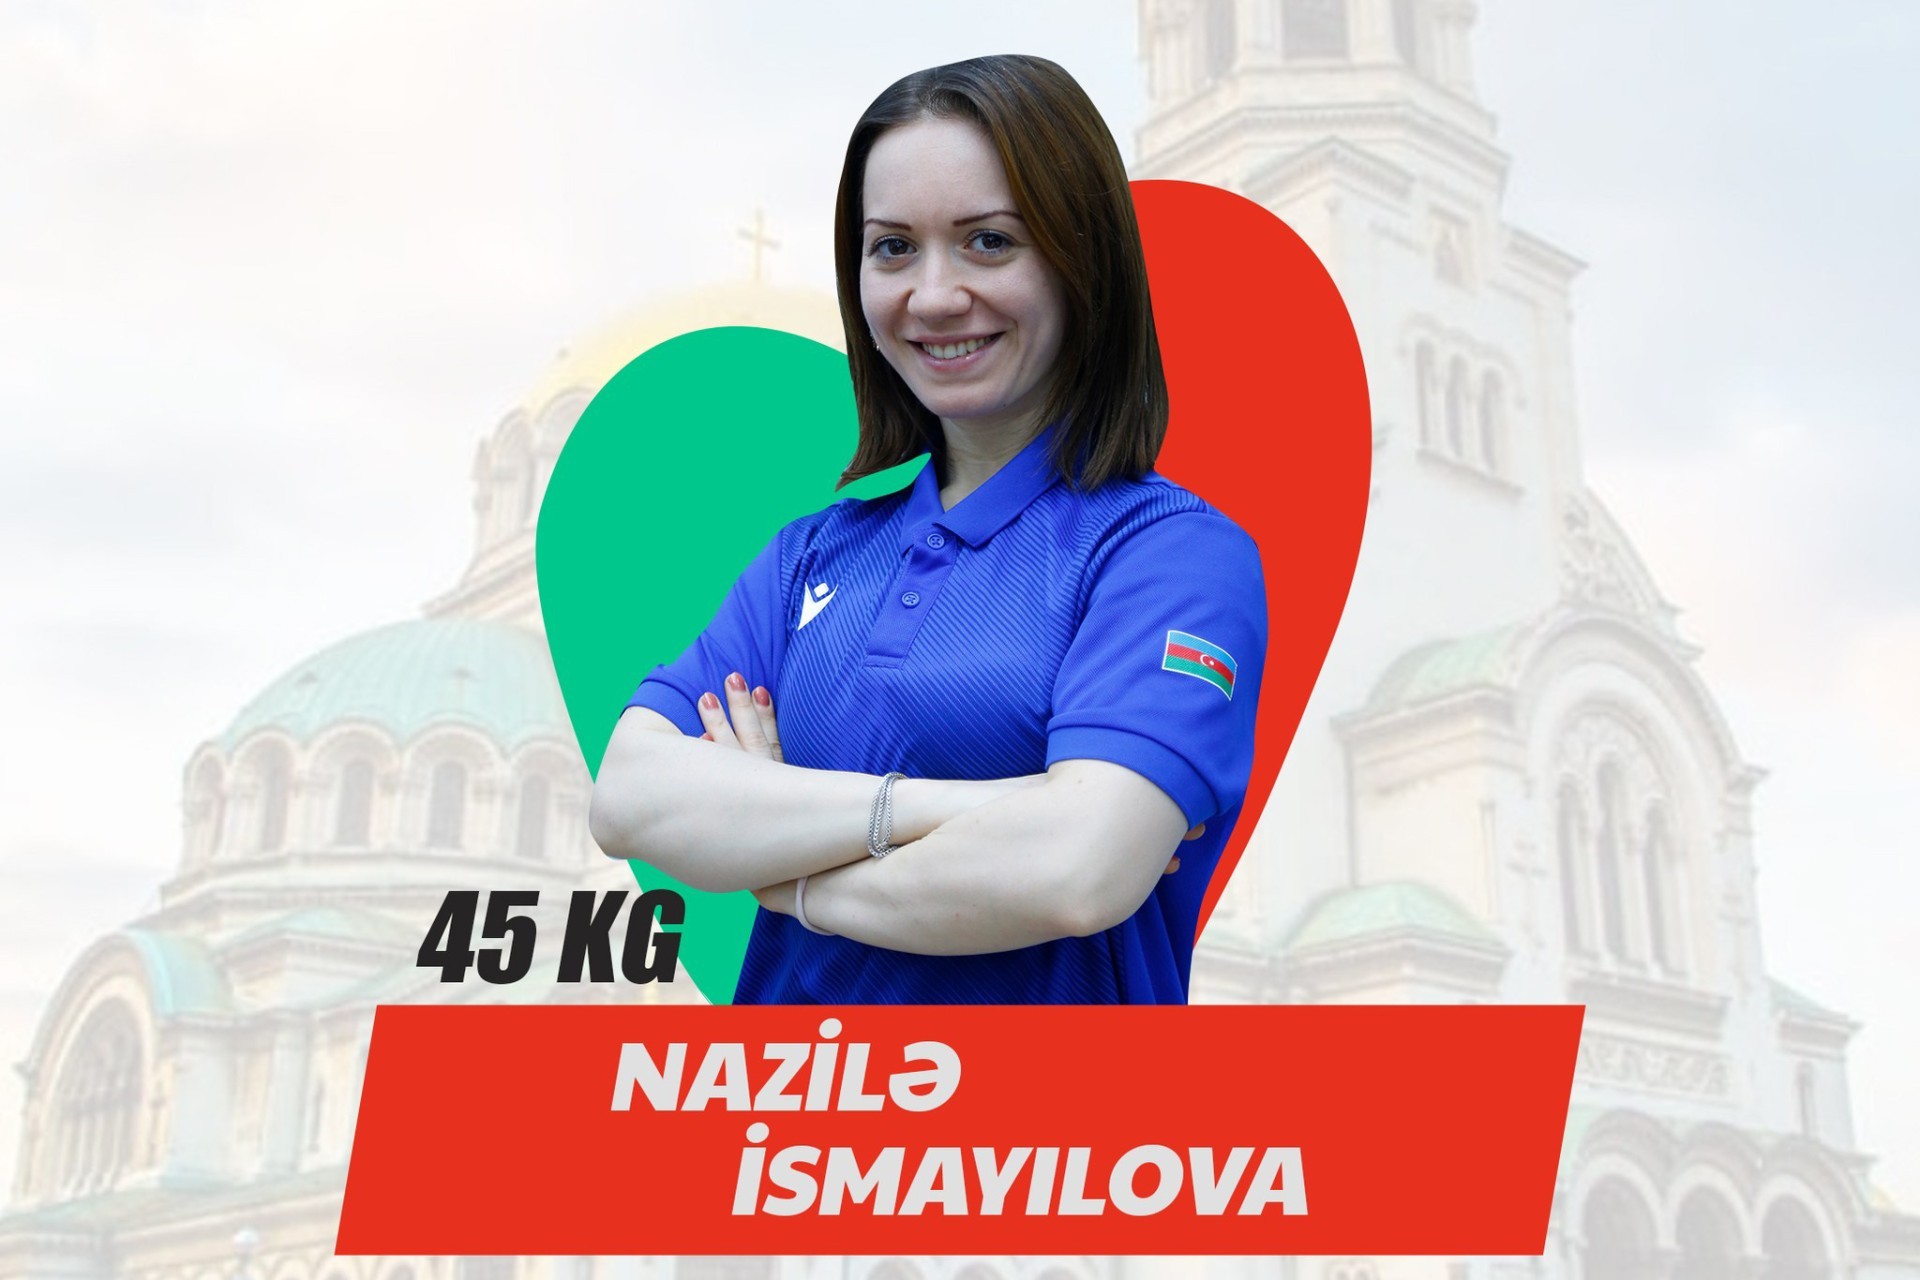 Nazila Ismayilova finished her performance at the European Championship - 3rd place in the group